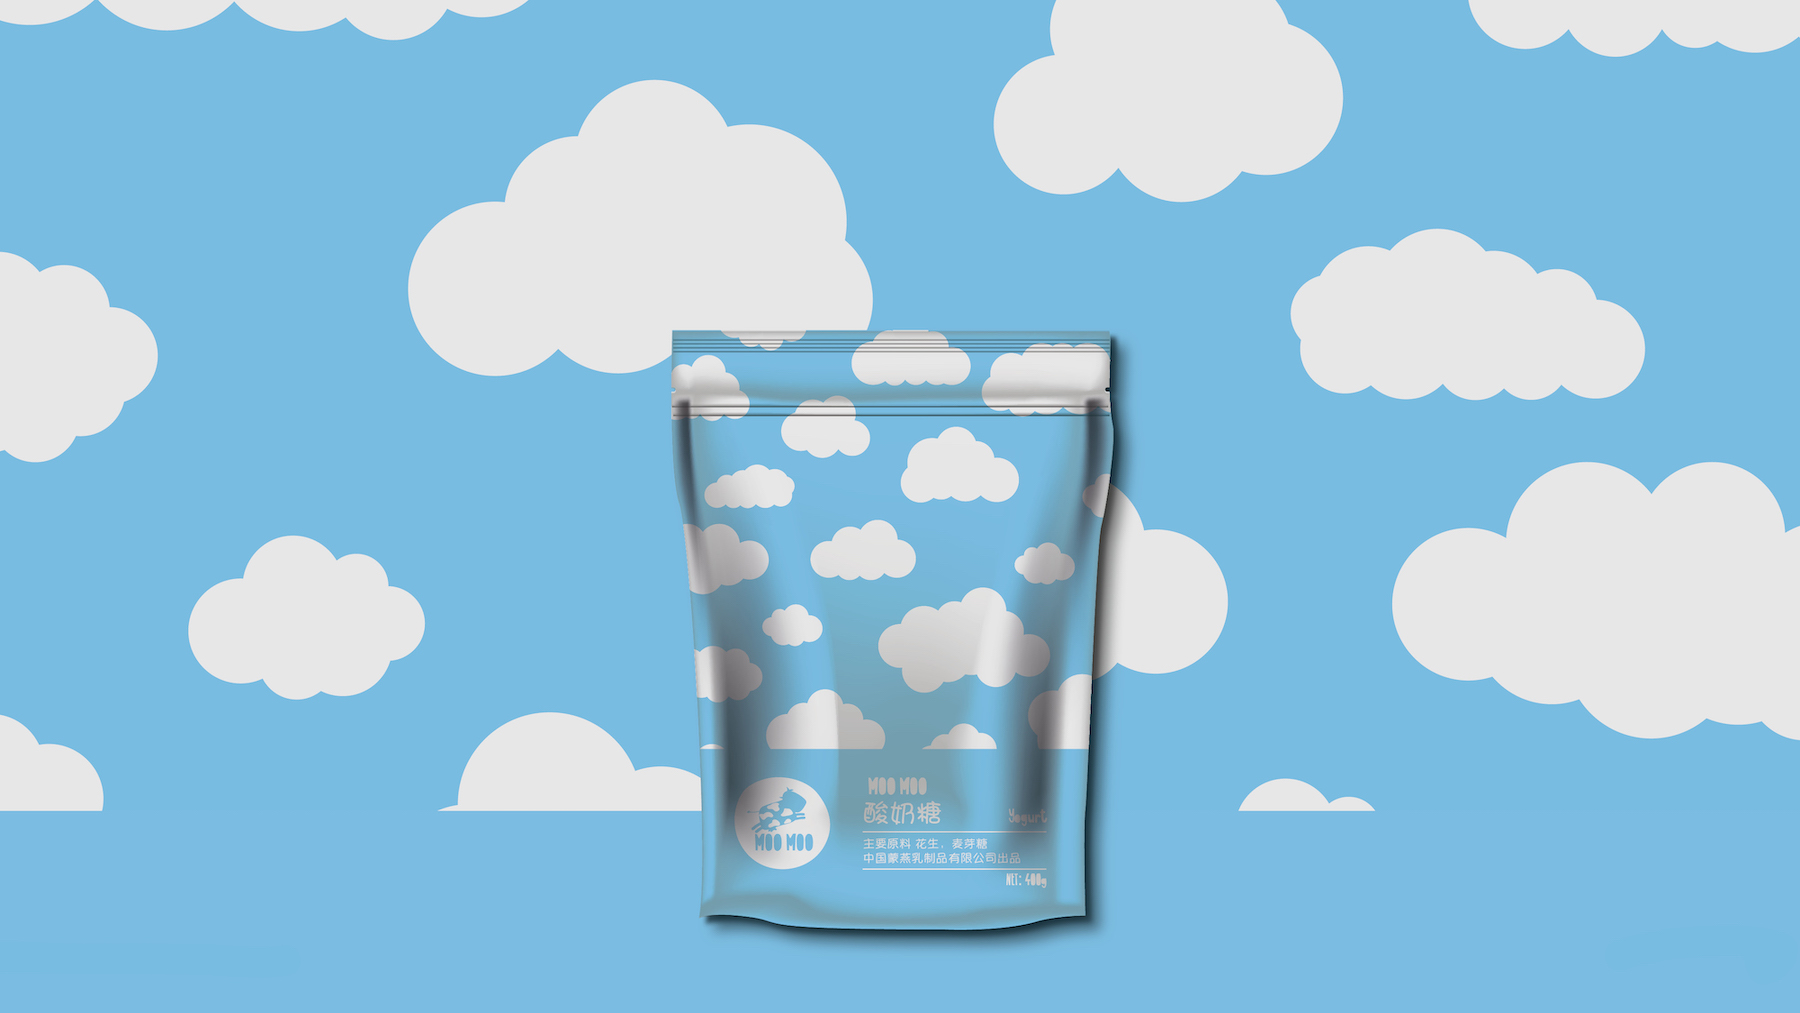 This design is for a Chinese Candy Manufacturer, mainly focuses on its branding and visual identification system. As the feature product for the manufacturer are dairy products, the brand is named as the sound of cows, Moo Moo; and the concept for its identify is “The Cow Jump Over the Moon”.